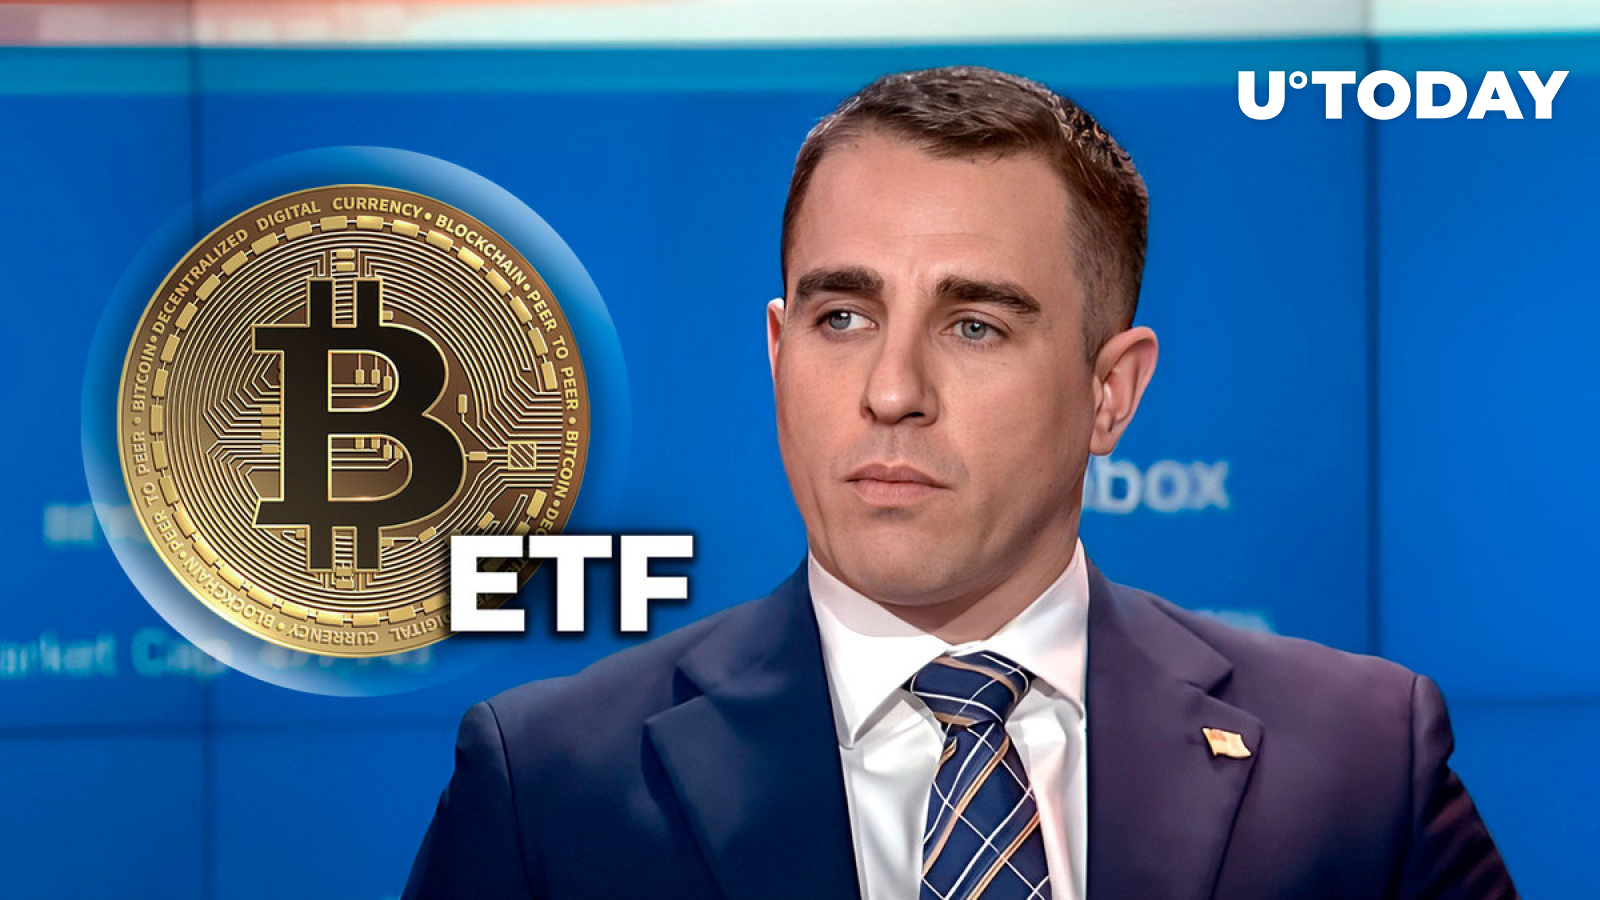 Bitcoin ETFs Break 30-Year Record In First Month of Trading, Pompliano Says: Details